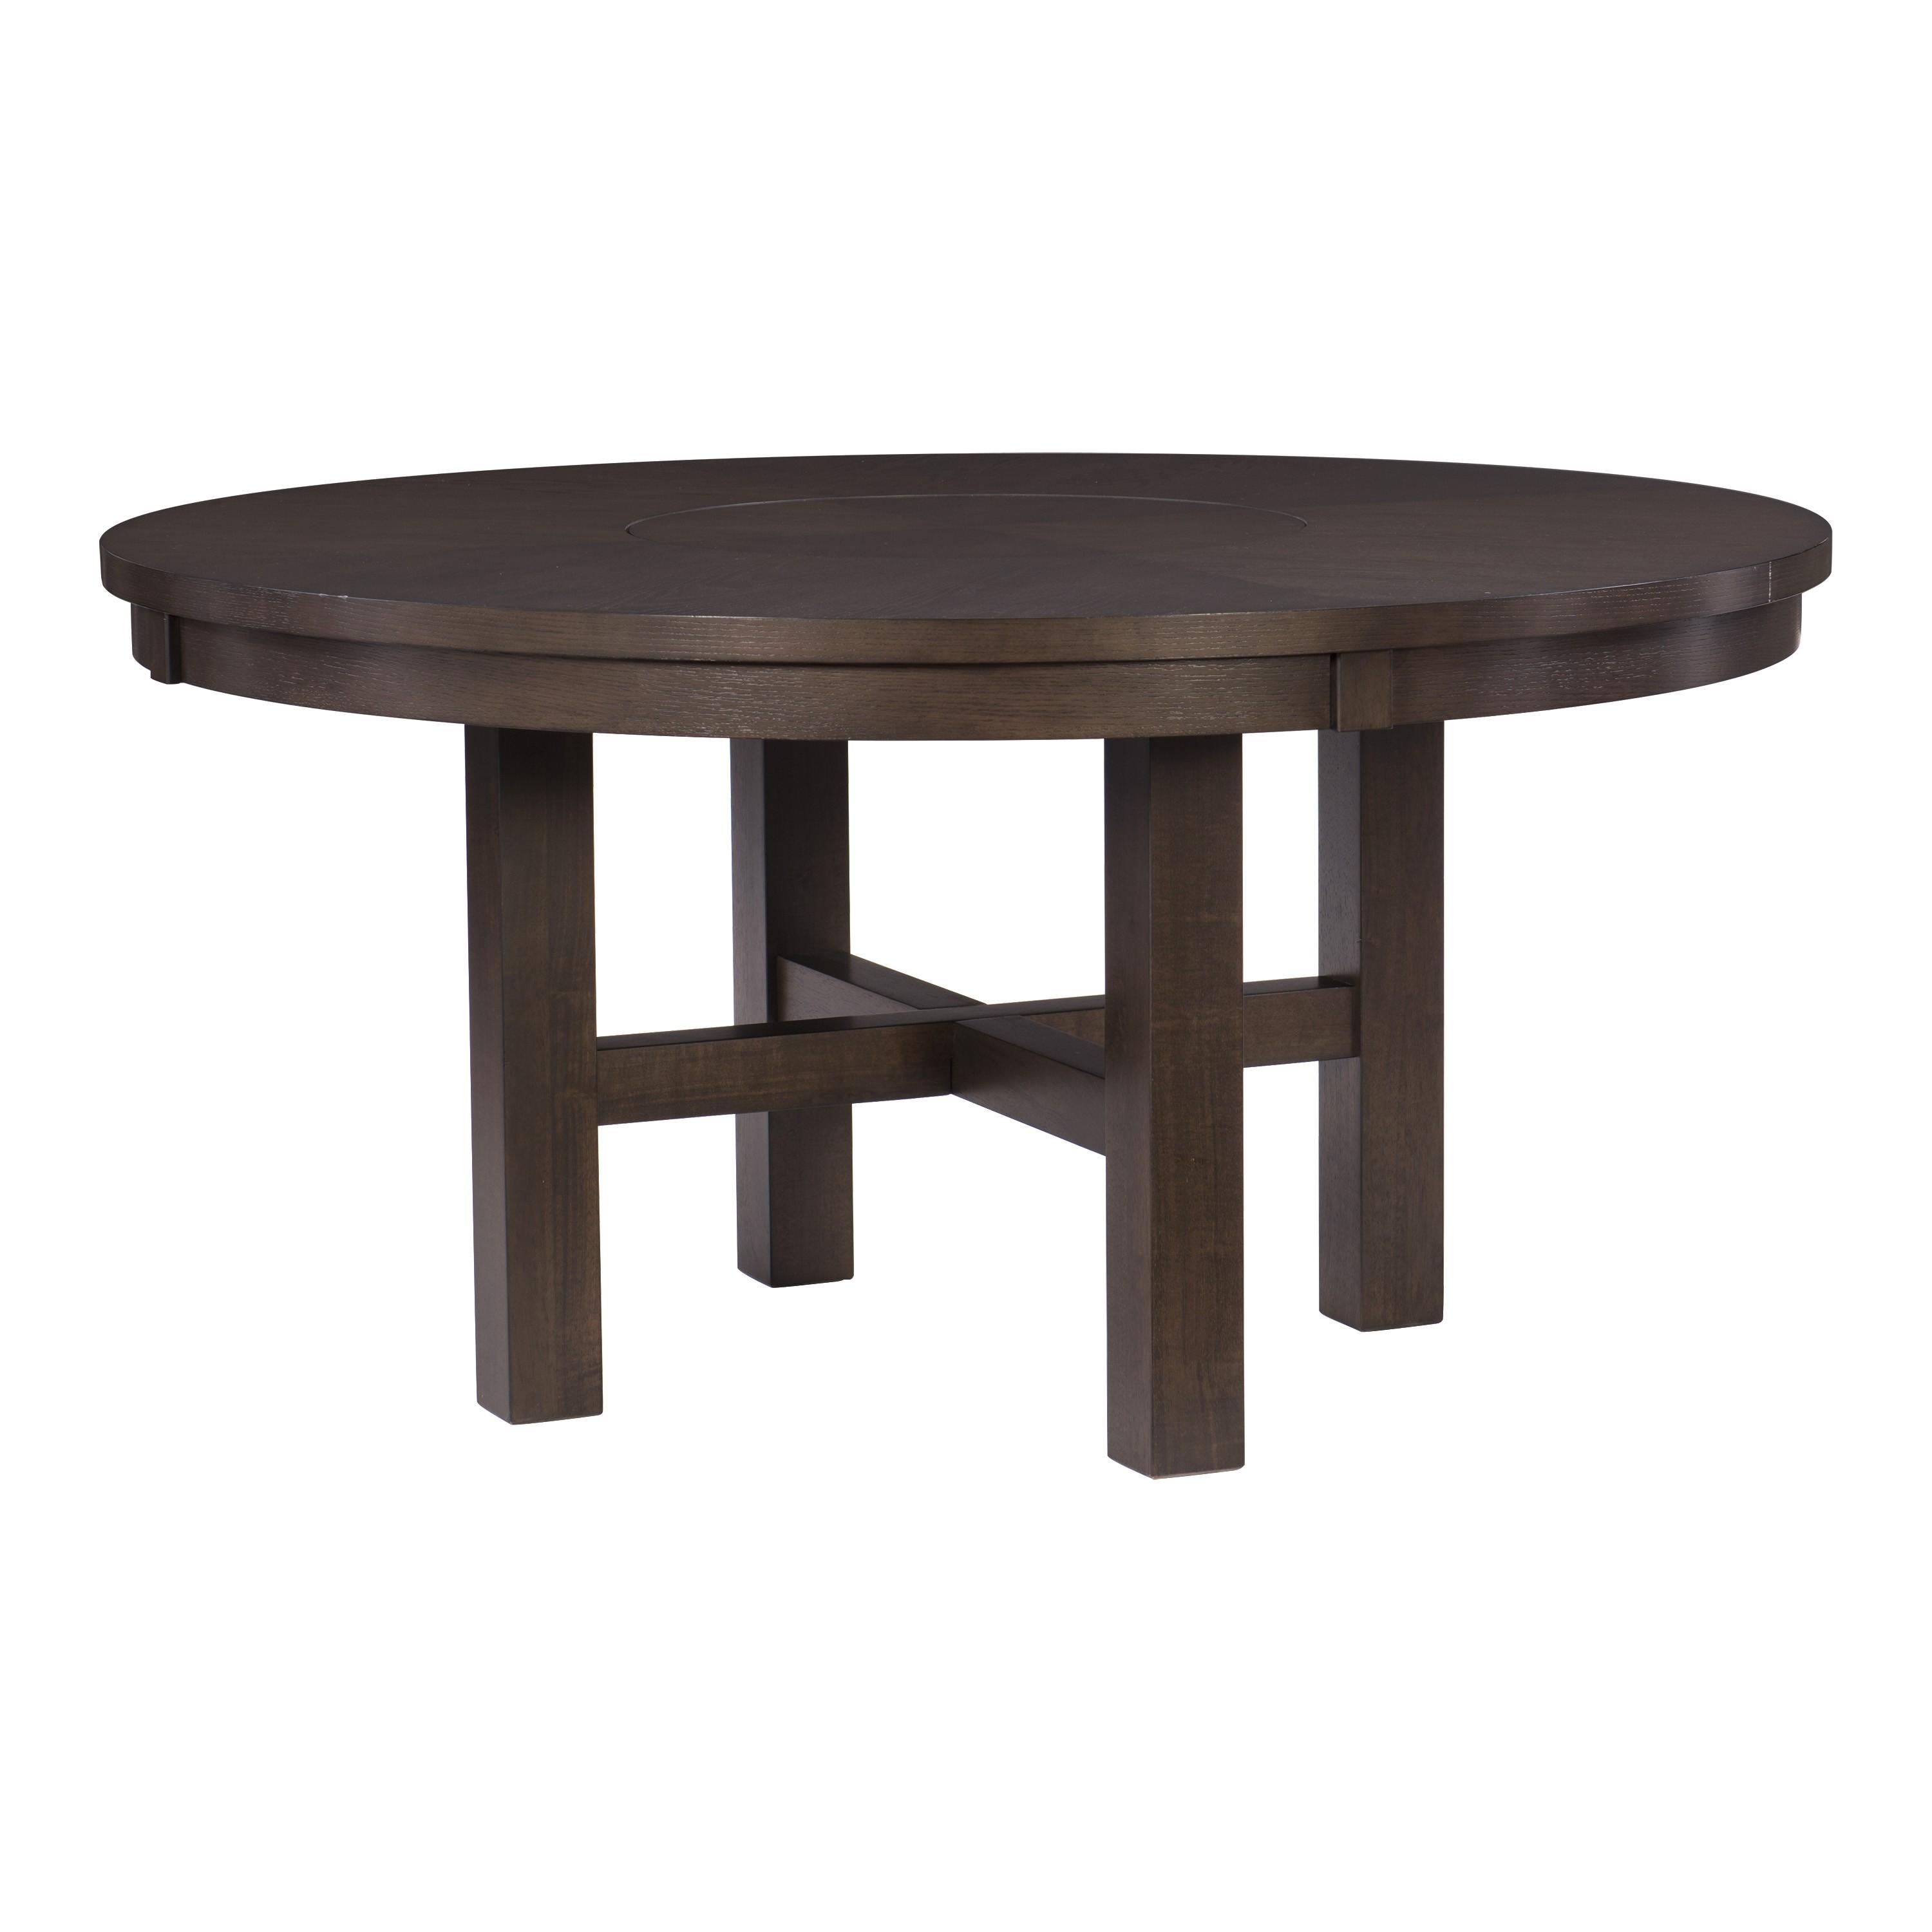 Transitional Dining Table 5718-60* Josie 5718-60* in Espresso 